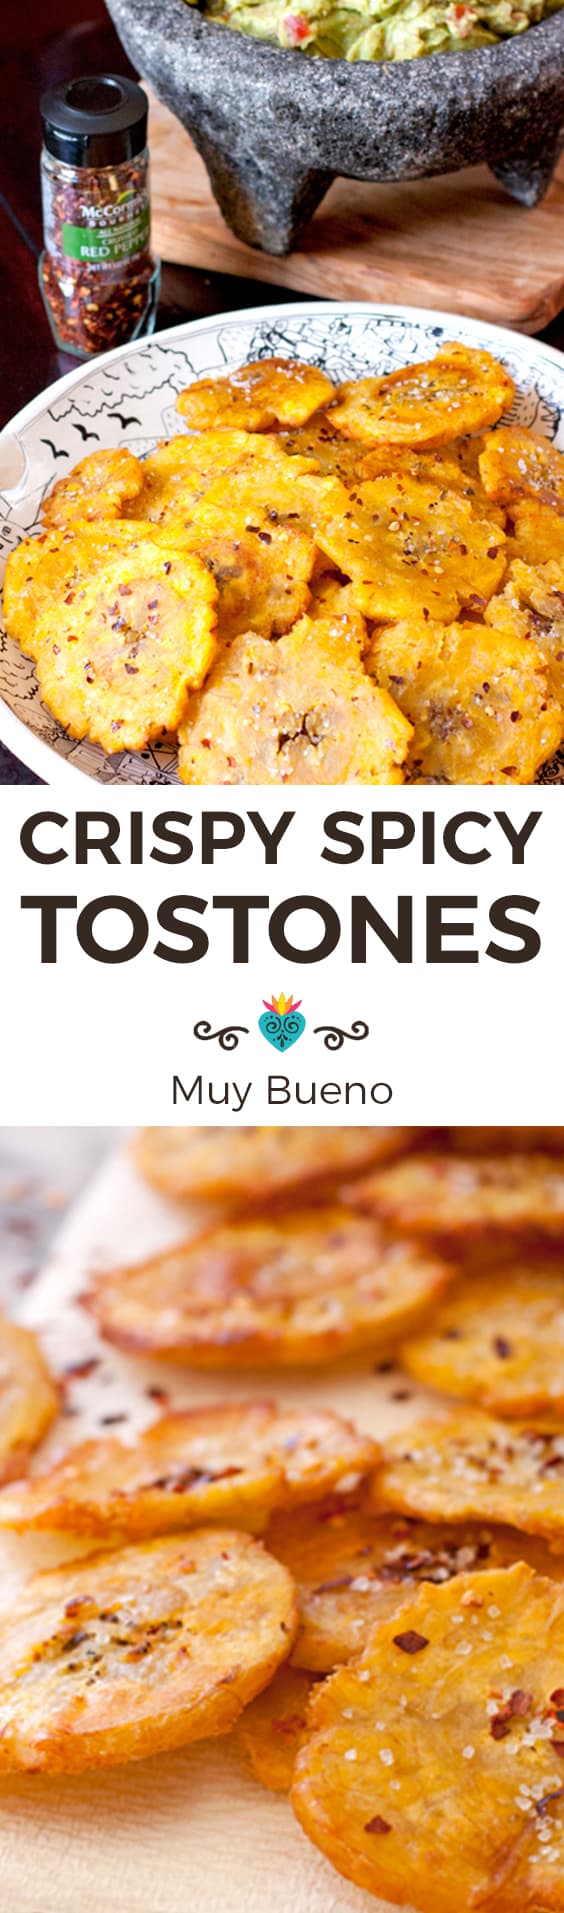 Crispy Spicy Tostones collage with text overlay